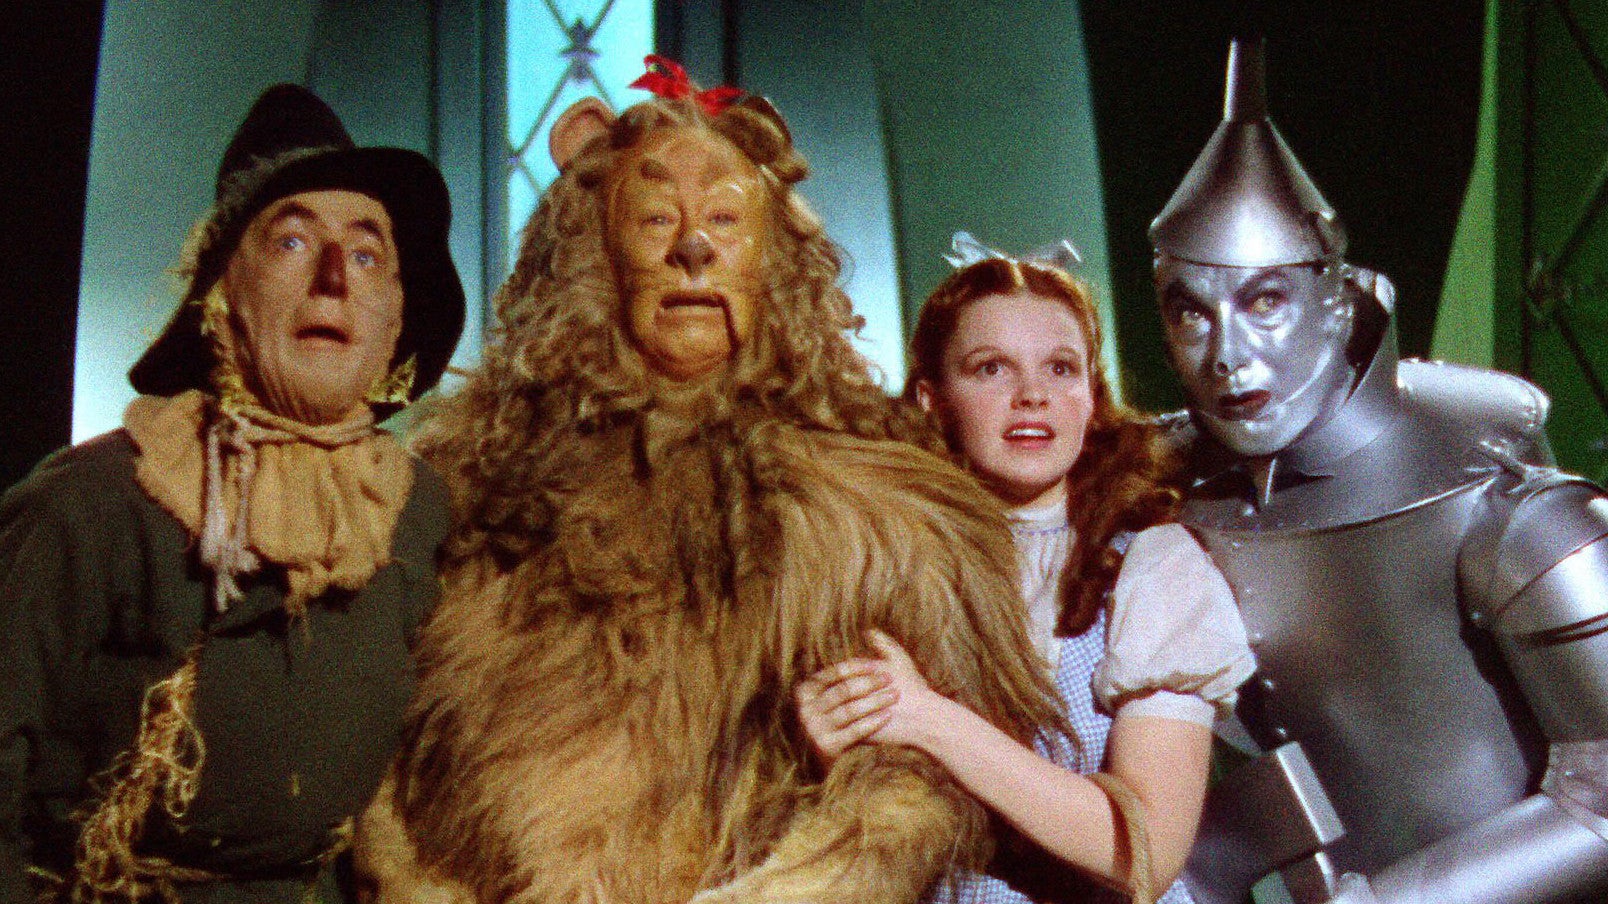 How To Find The ‘Wizard Of Oz’ Ruby Slippers Easter Egg On Google